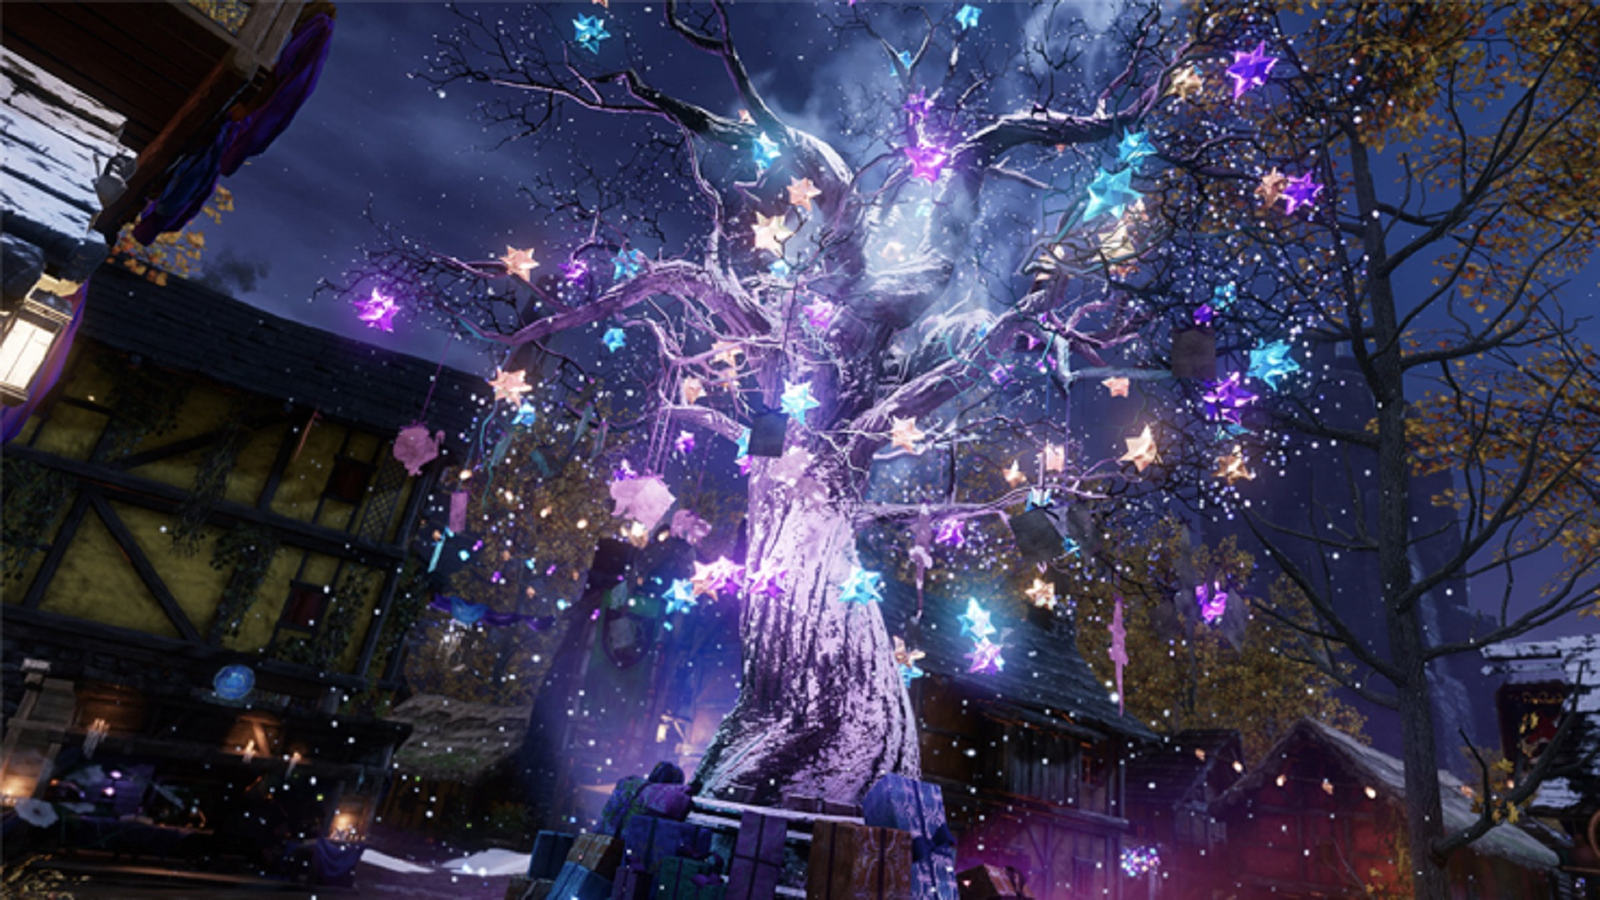 Blue Archive adds two new characters and gives away plenty of goodies with  an early Christmas event